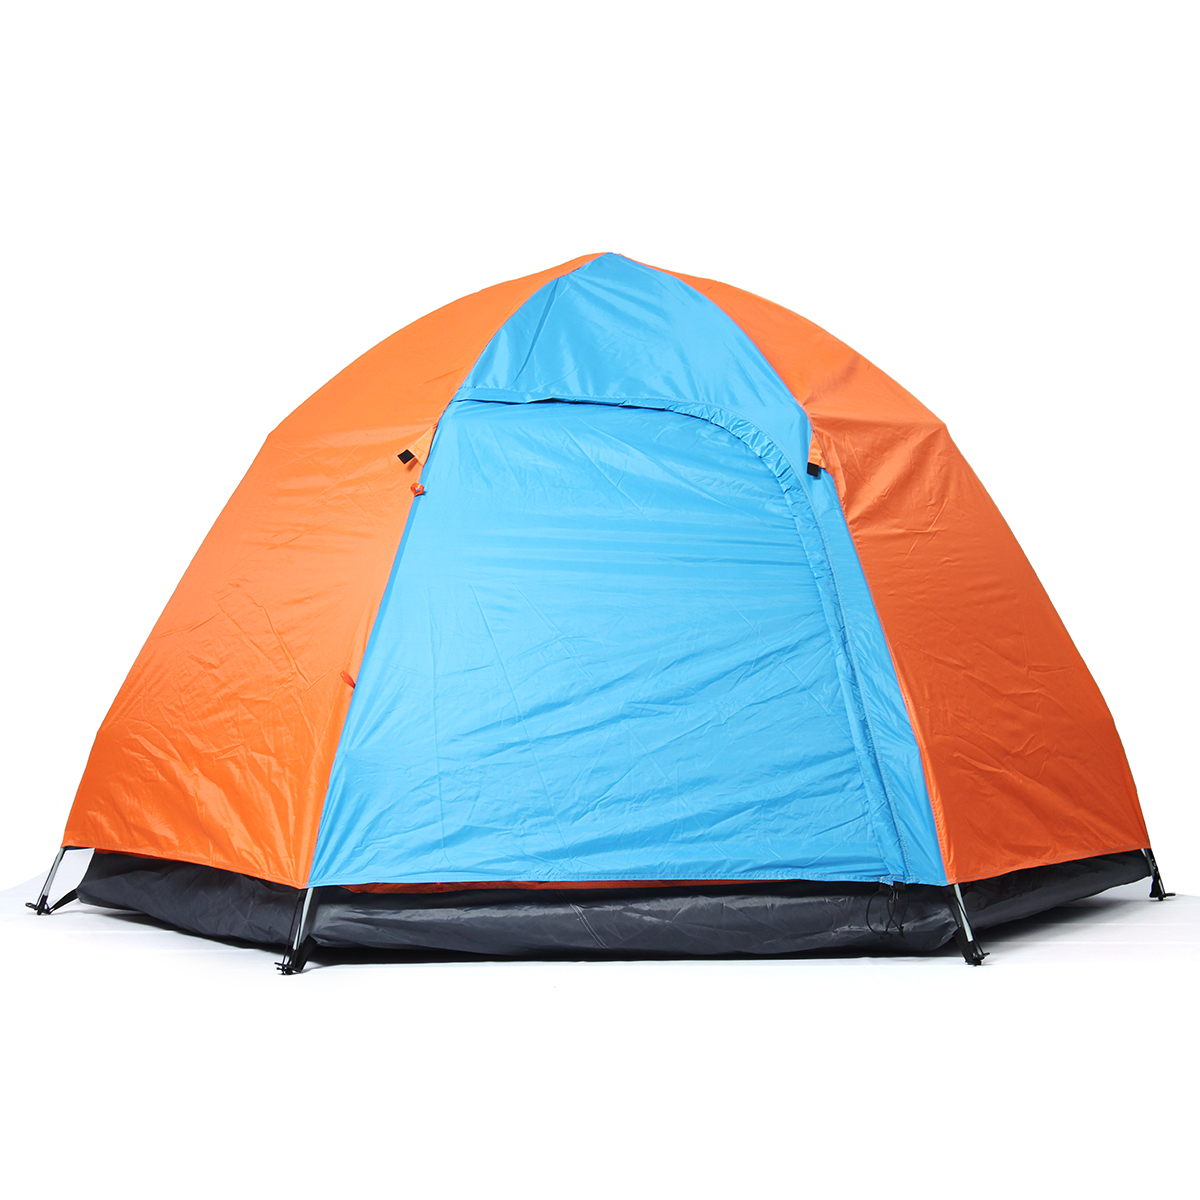 IPRee 5-7 Persons Automatic Waterproof Large Camping Hiking Tent Outdoor Base Camp Blue/Orange